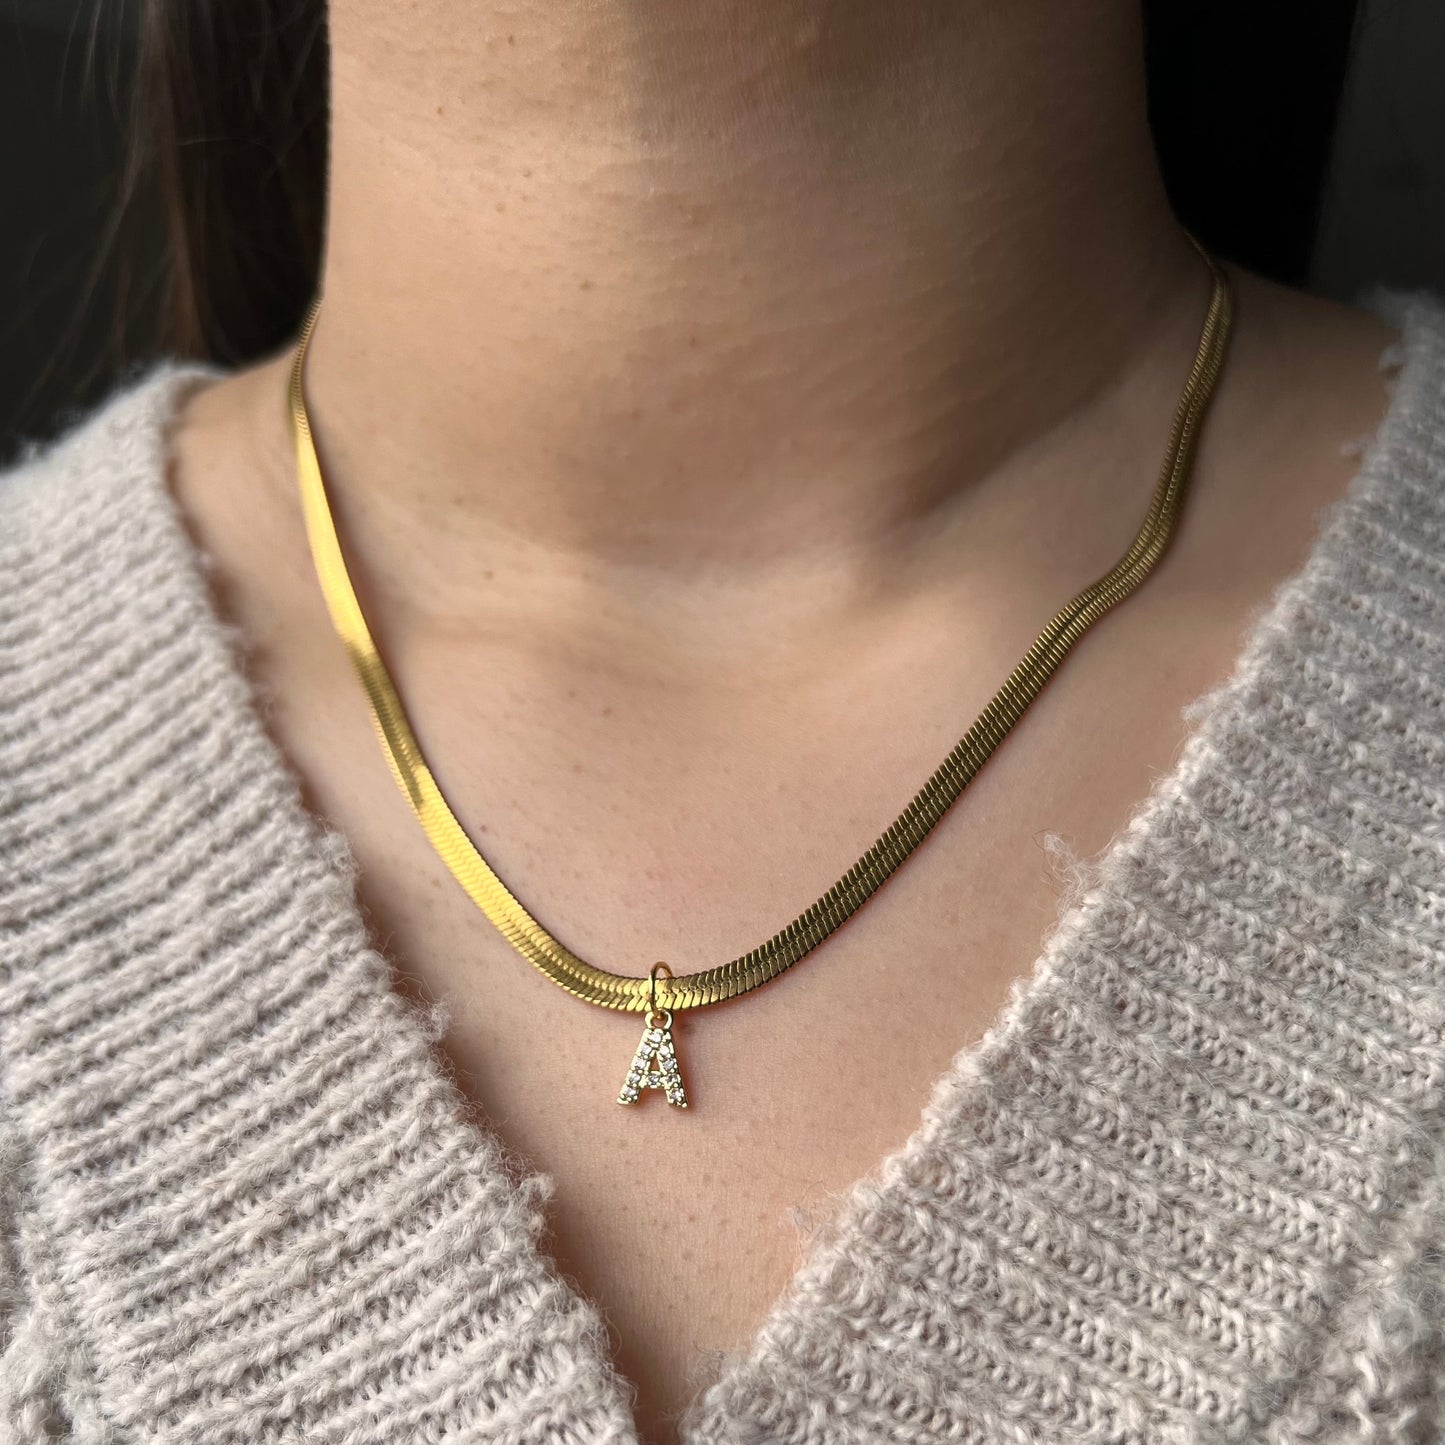 Get trendy with Initial Pendant Tara Necklace -  available at Alma Ireland. Grab yours for €29.99 today!